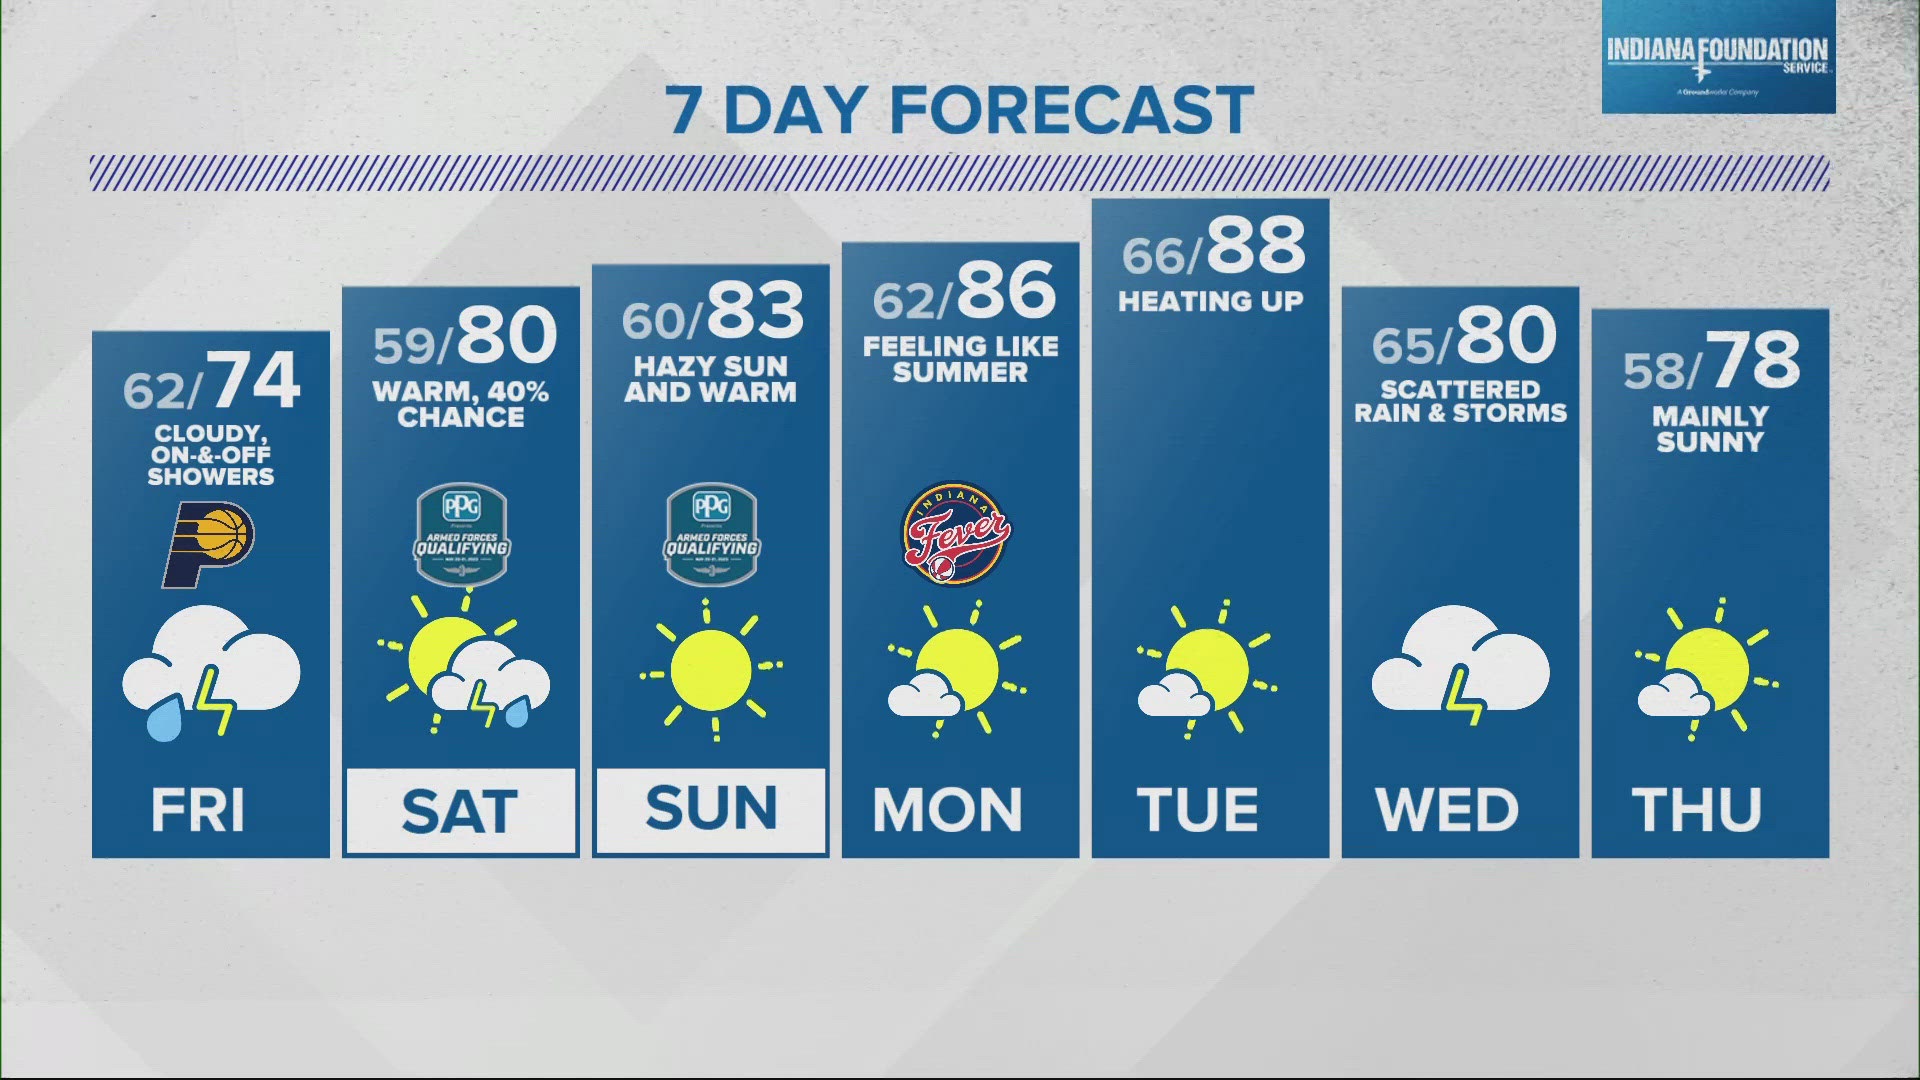 Rain will be around again Friday, but there should be lots of dry time for Fast Friday at Indianapolis Motor Speedway.